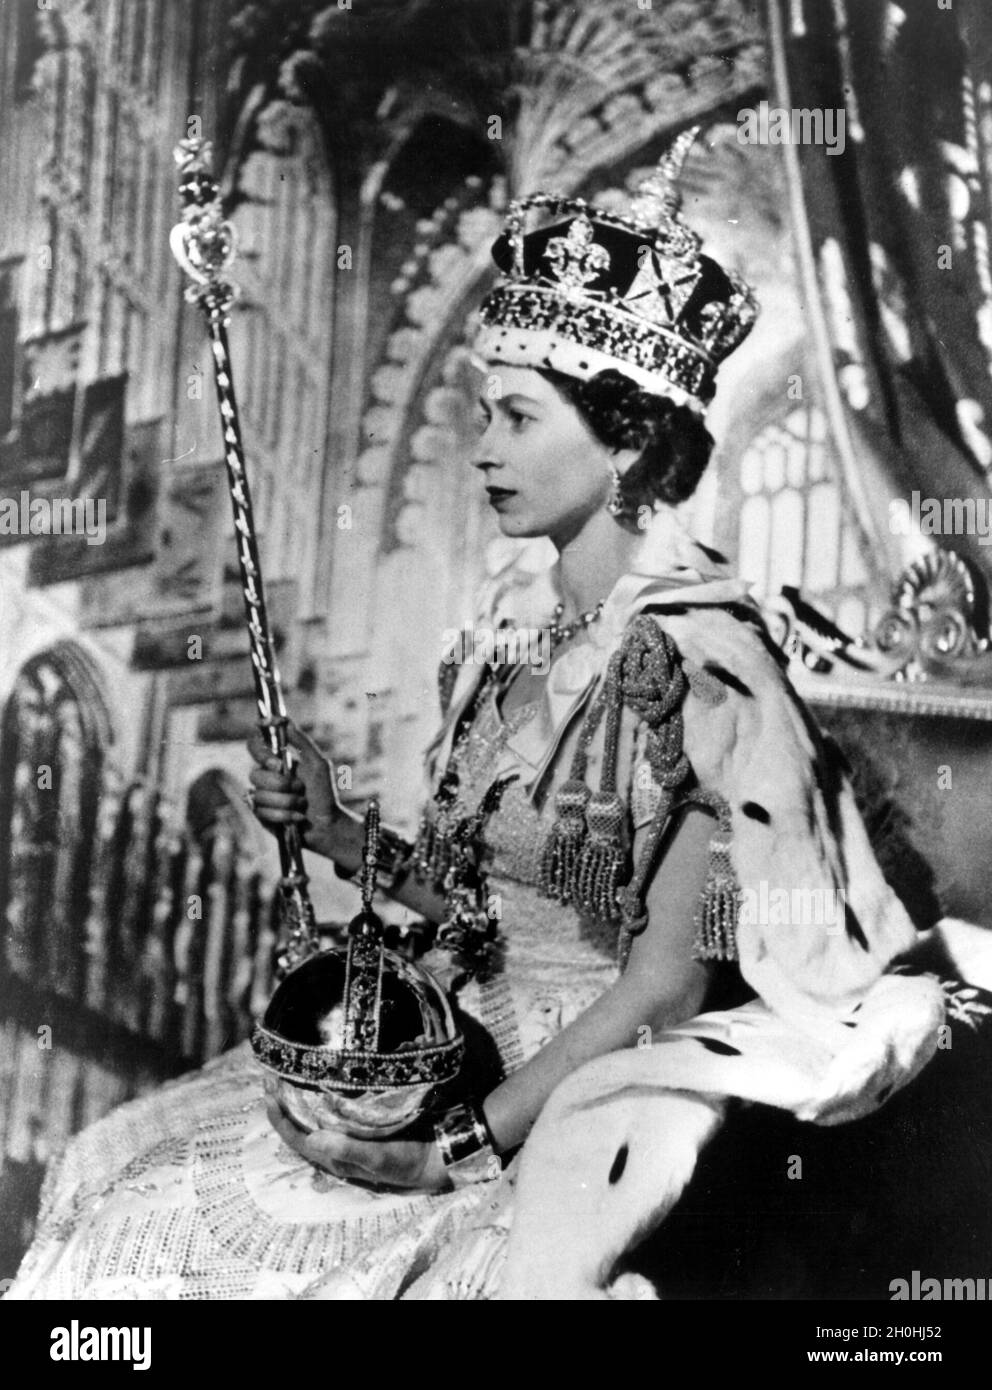 June 2, 1953, London, England: QUEEN ELIZABETH II, 27, crowned at her coronation ceremony in Westminster Abbey in London. In front of more than 8,000 guests, including prime ministers and heads of state from around the Commonwealth and the world, she took the Coronation Oath and is now bound to serve her people and to maintain the laws of God. The Queen seated in the Throne Room at Buckingham Palace after her Coronation in Westminster Abbey. QEII wears the Imperial State Crown. In her left hand holds the Orb, in her right hand the Scepter with the cross. (Credit Image: © Keystone Press Agency Stock Photo